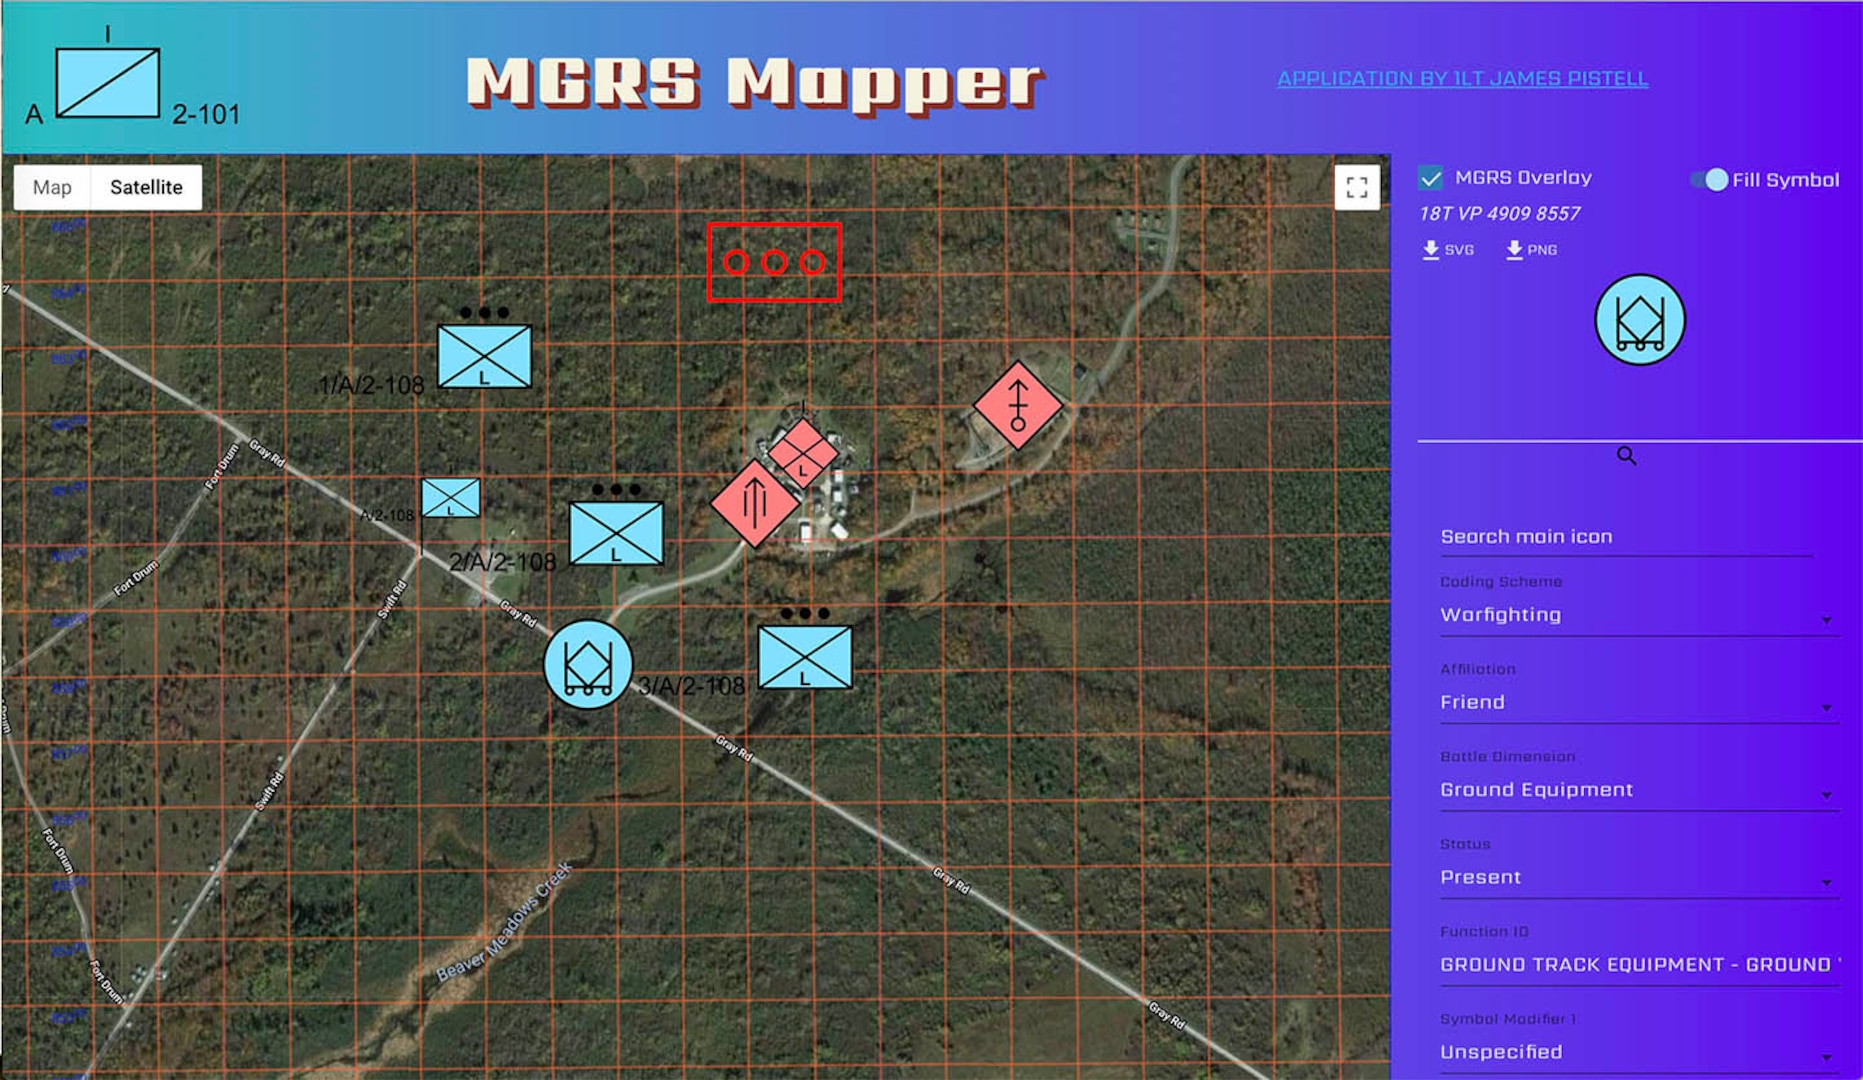 The MGRS-Mapper  computer application developed by New York Army National Guard 1st Lt. James Pistell allows users to overlay the military grid reference system on a Google maps image and then create and place tactical and warfighting graphics and symbols on it to be used as an overlay and shared via email.